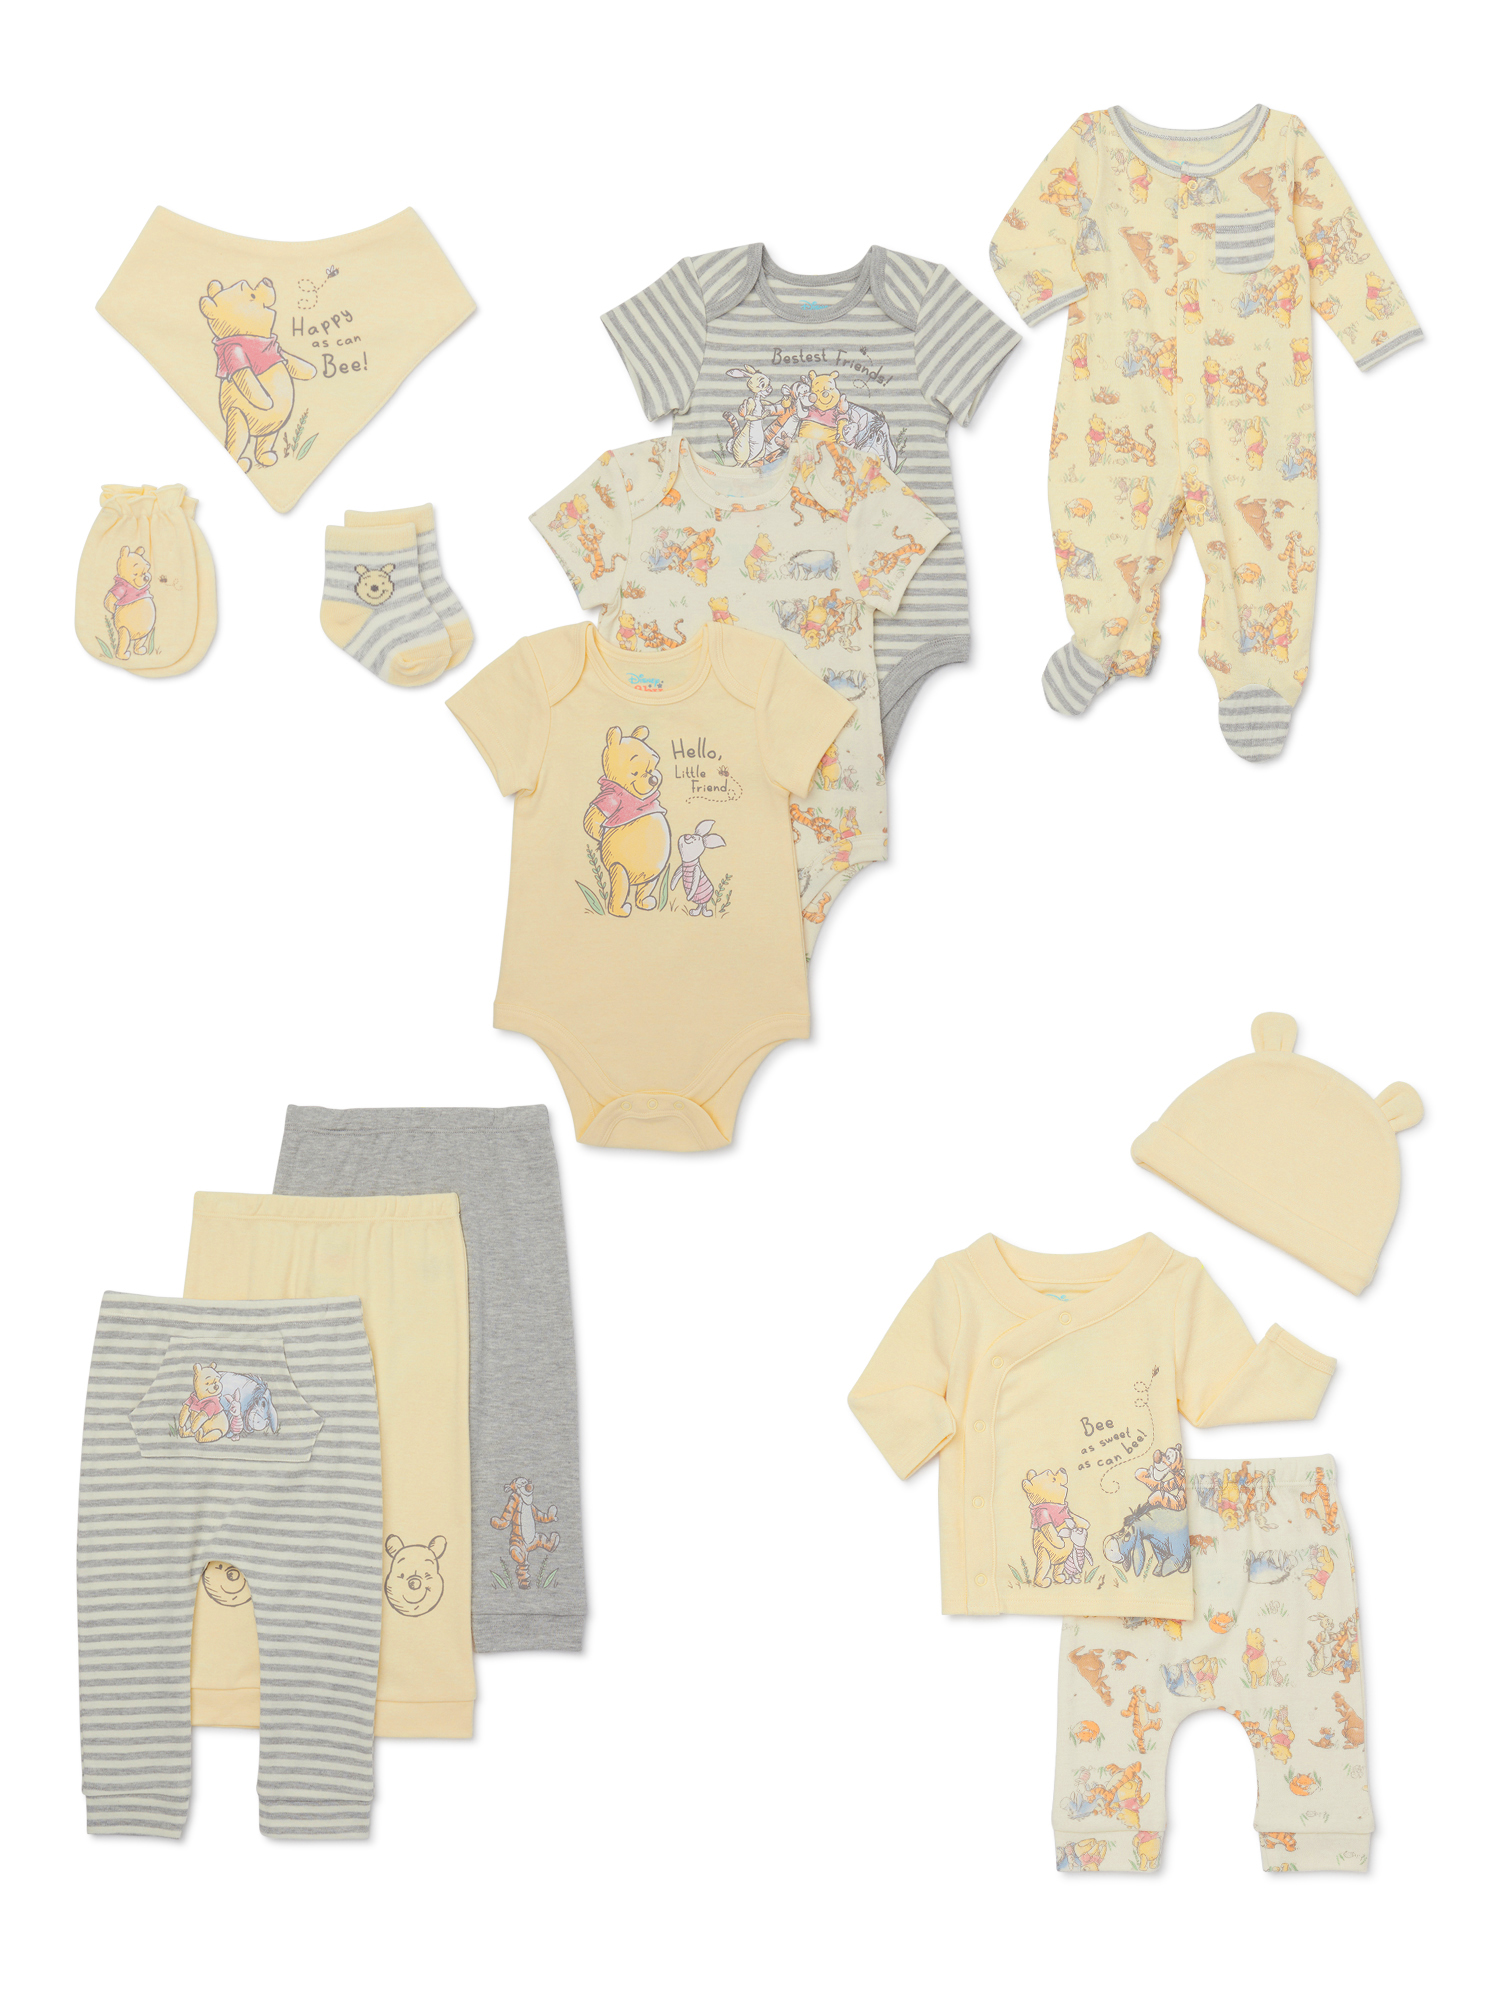 Disney Baby Wishes + Dreams Winnie the Pooh Layette Shower Gift Set Bundle, 13-Piece, Sizes NB-3/6M - image 1 of 14